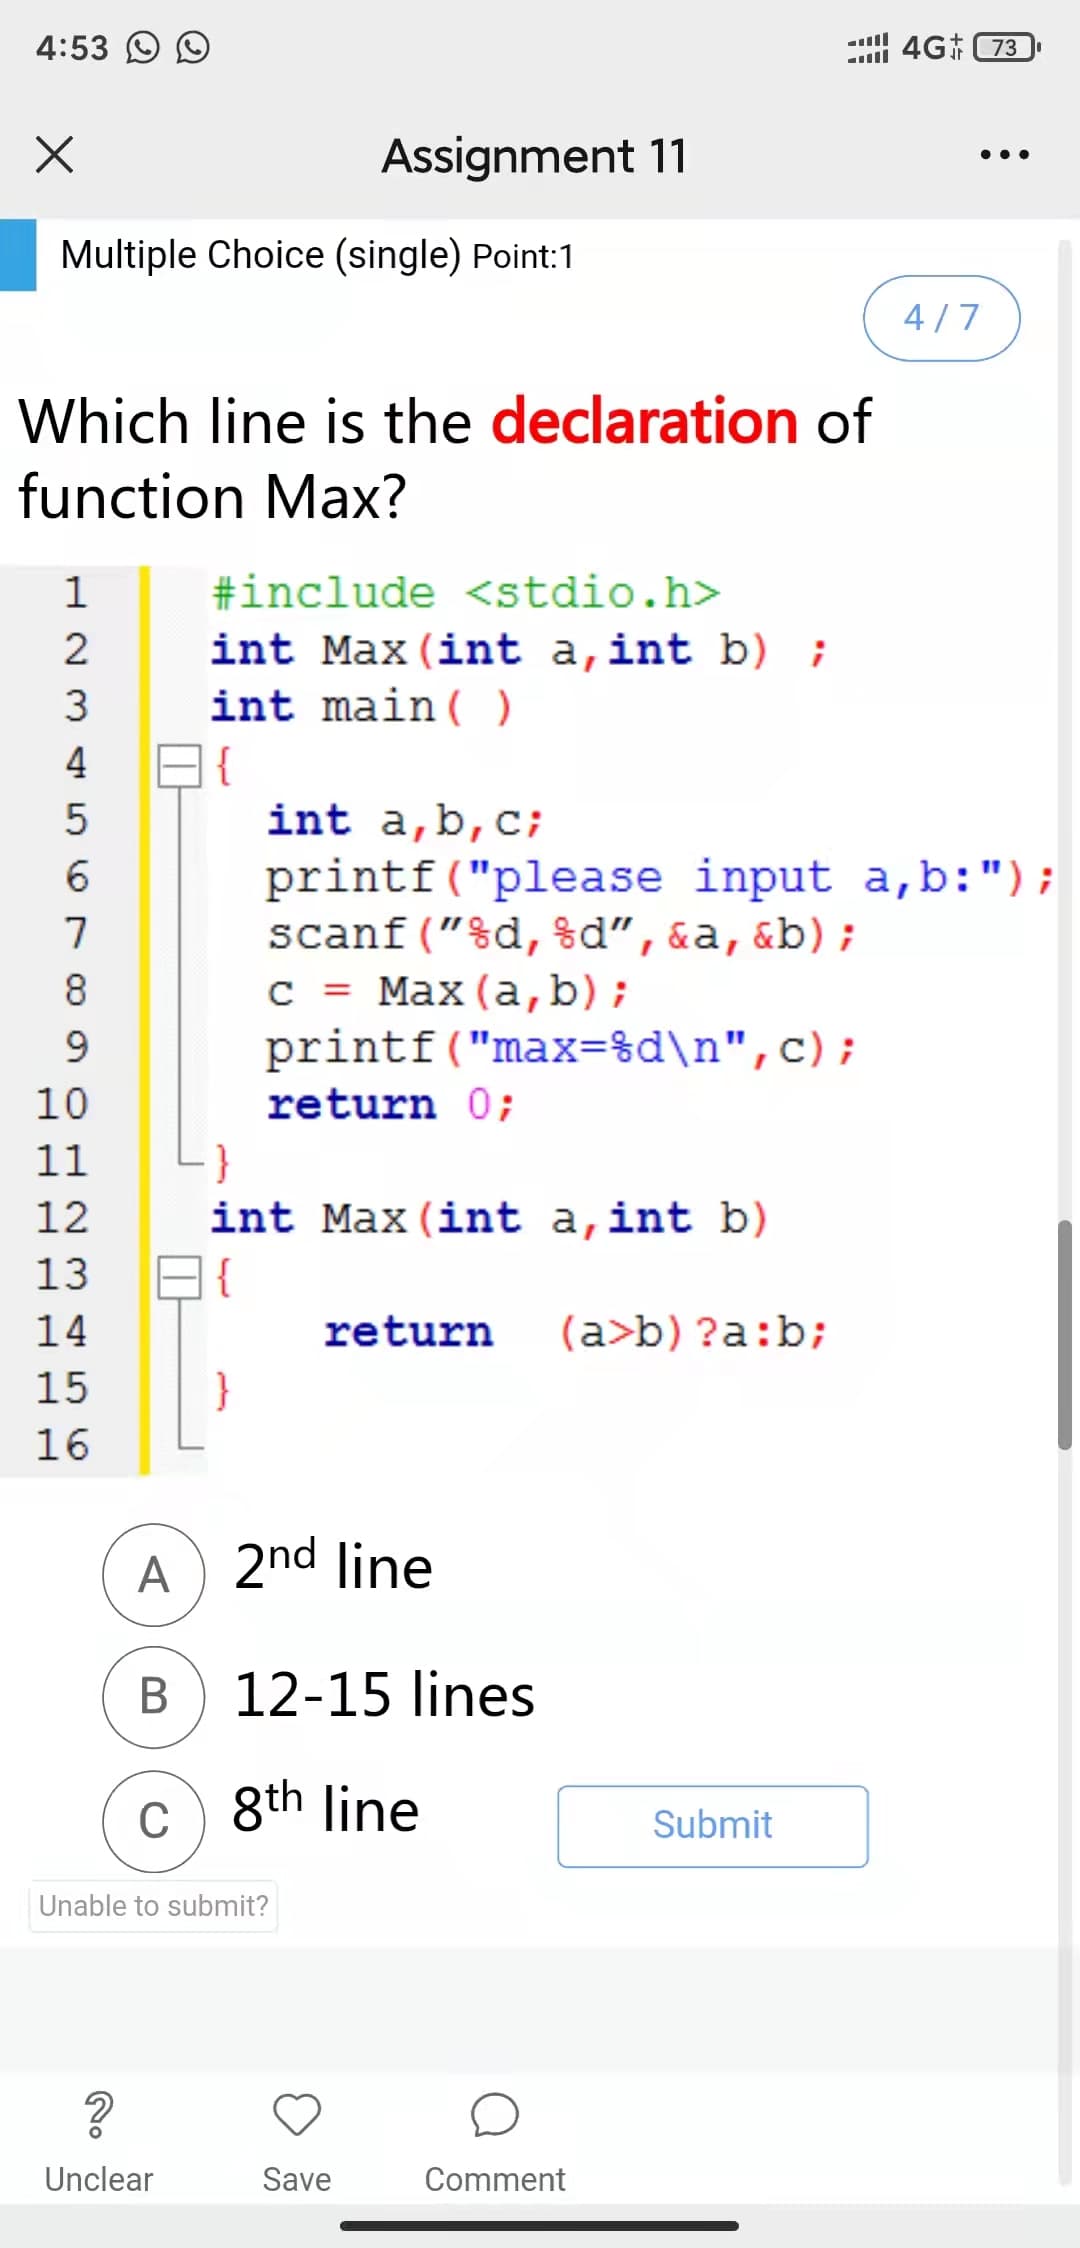 4:53 O O
4G 73
Assignment 11
•..
Multiple Choice (single) Point:1
4/7
Which line is the declaration of
function Max?
#include <stdio.h>
int Max (int a,int b) ;
int main( )
1
3
4
{
int a,b,c;
printf("please input a,b:");
scanf ("%d, %d",&a,&b);
с %3D Мах (а, b);
printf("max=%d\n",c);
8
9.
10
return 0;
11
12
int Max (int a,int b)
13
14
return
(a>b) ?a:b;
15
}
16
A) 2nd line
В
12-15 lines
c) 8th line
Submit
Unable to submit?
Unclear
Save
Comment
